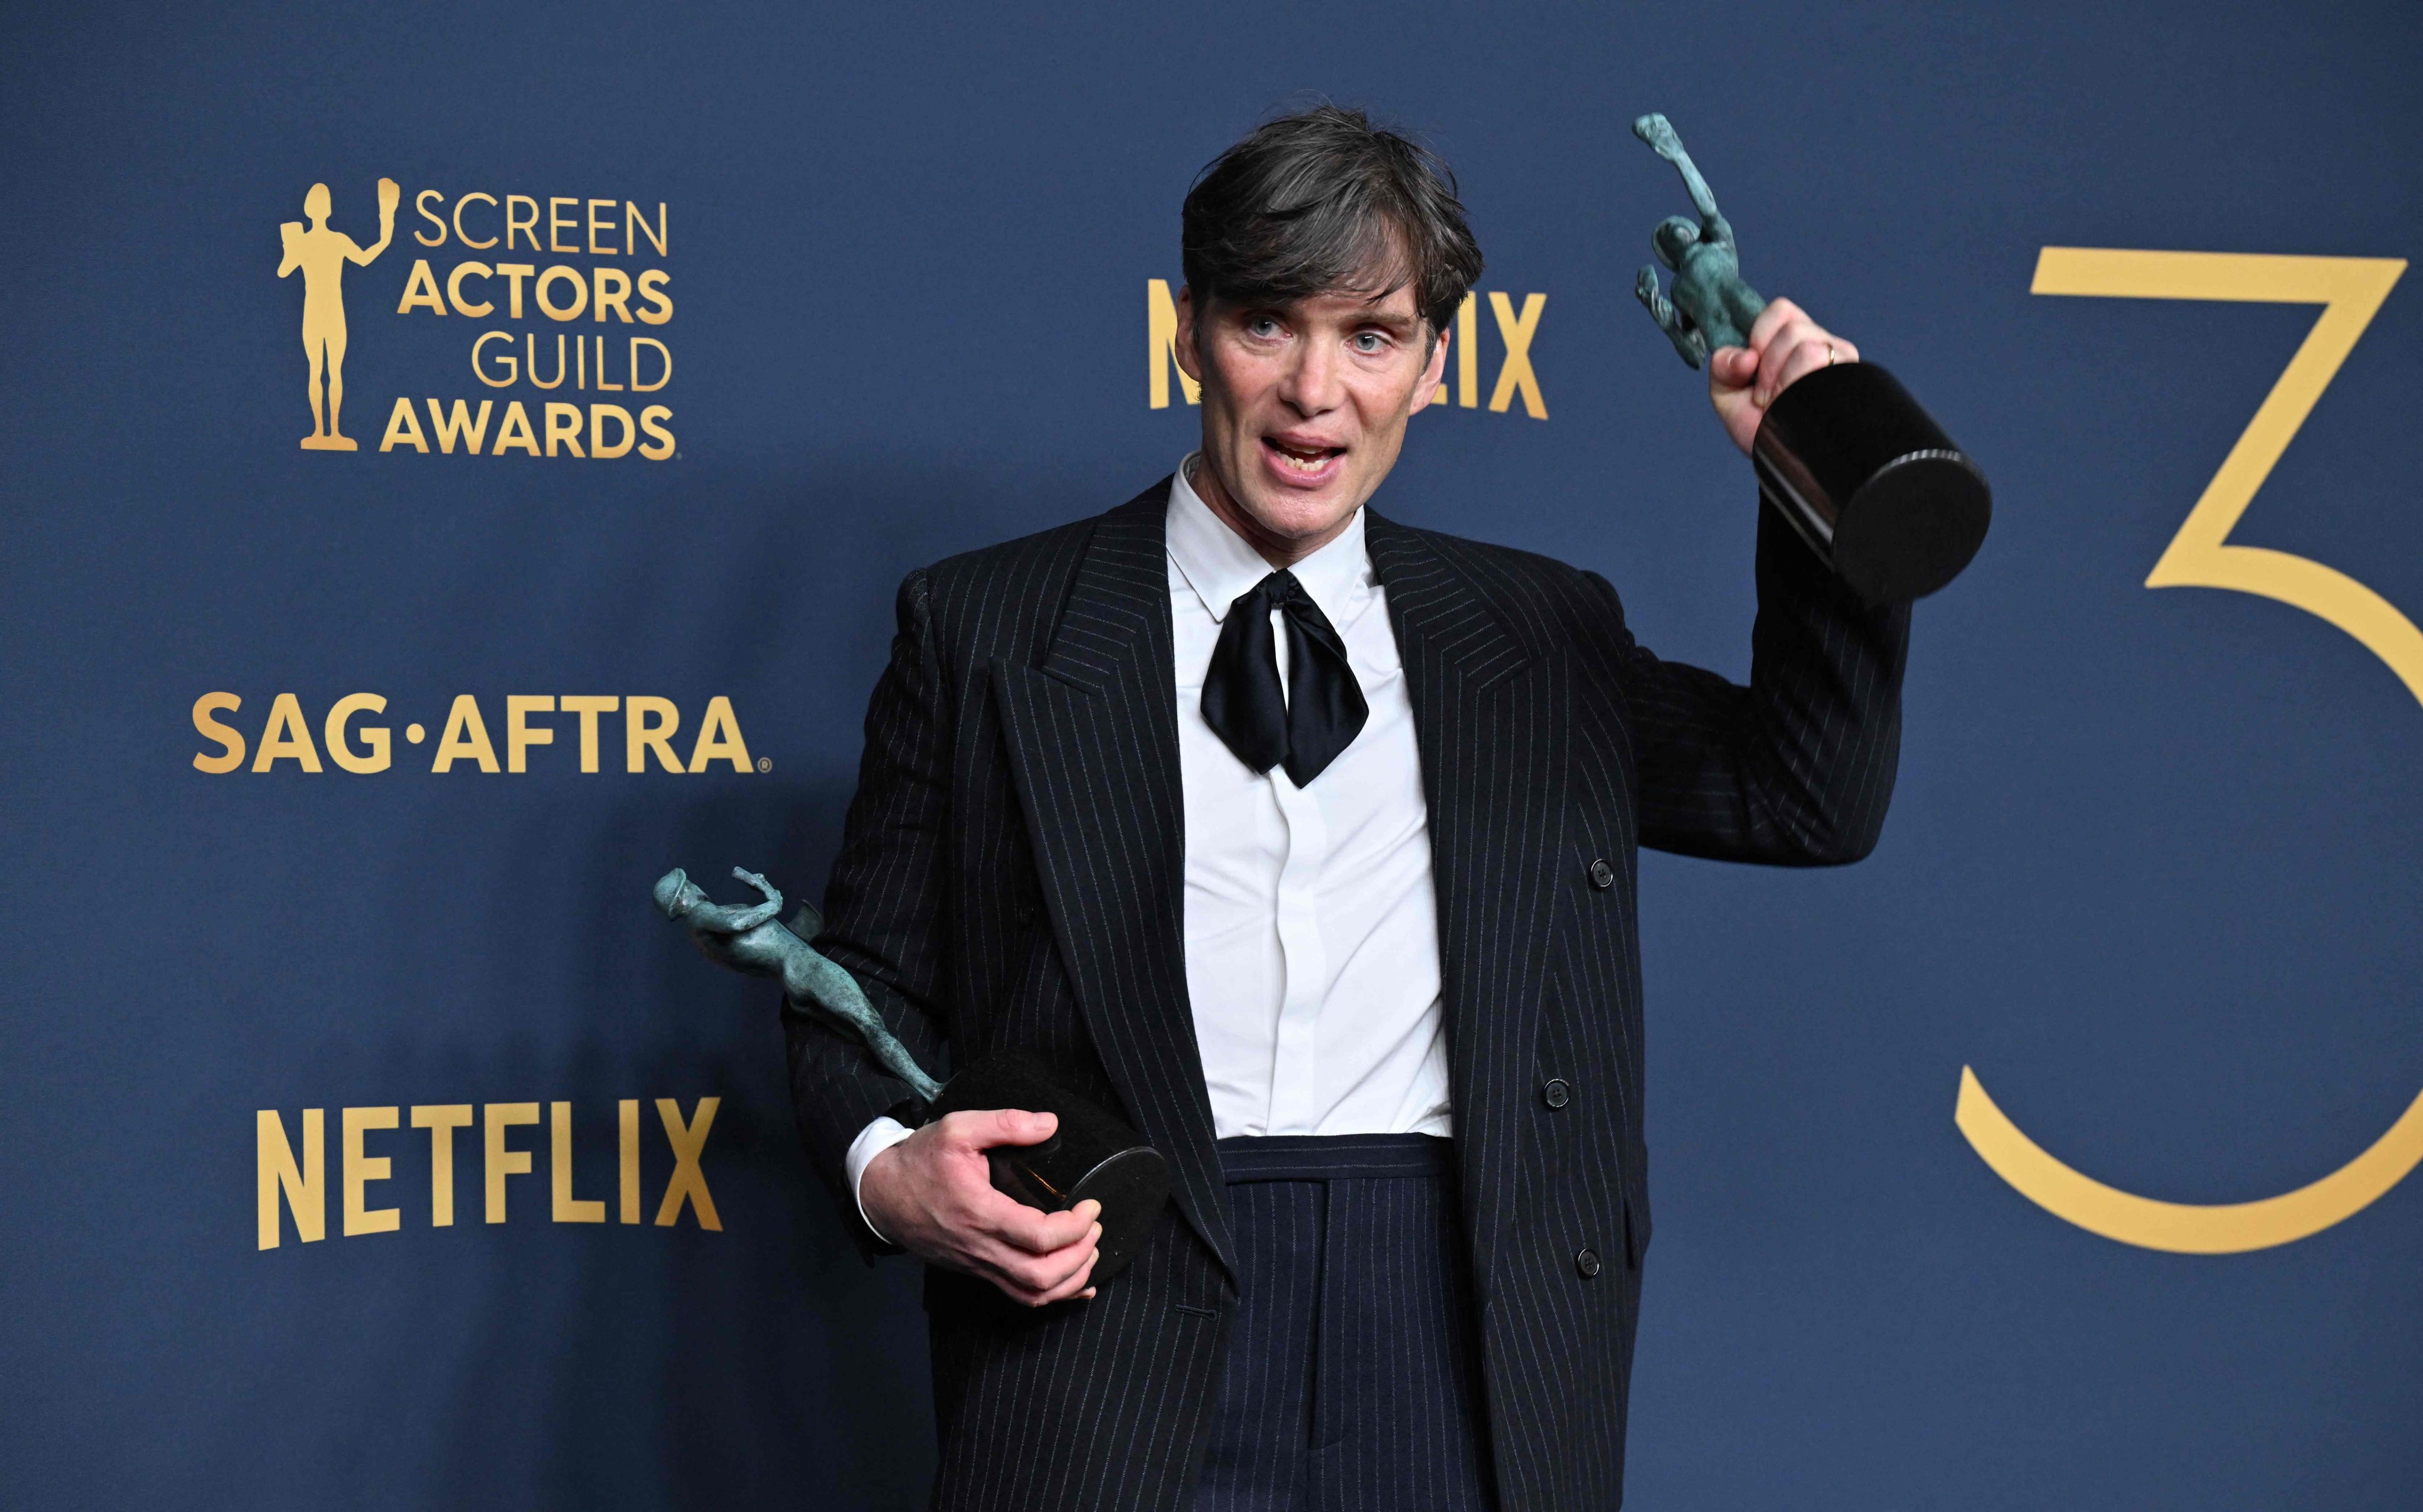 Irish actor Cillian Murphy poses in the press room with his trophies during the Screen Actors Guild Awards in Los Angeles on Saturday. Photo: AFP